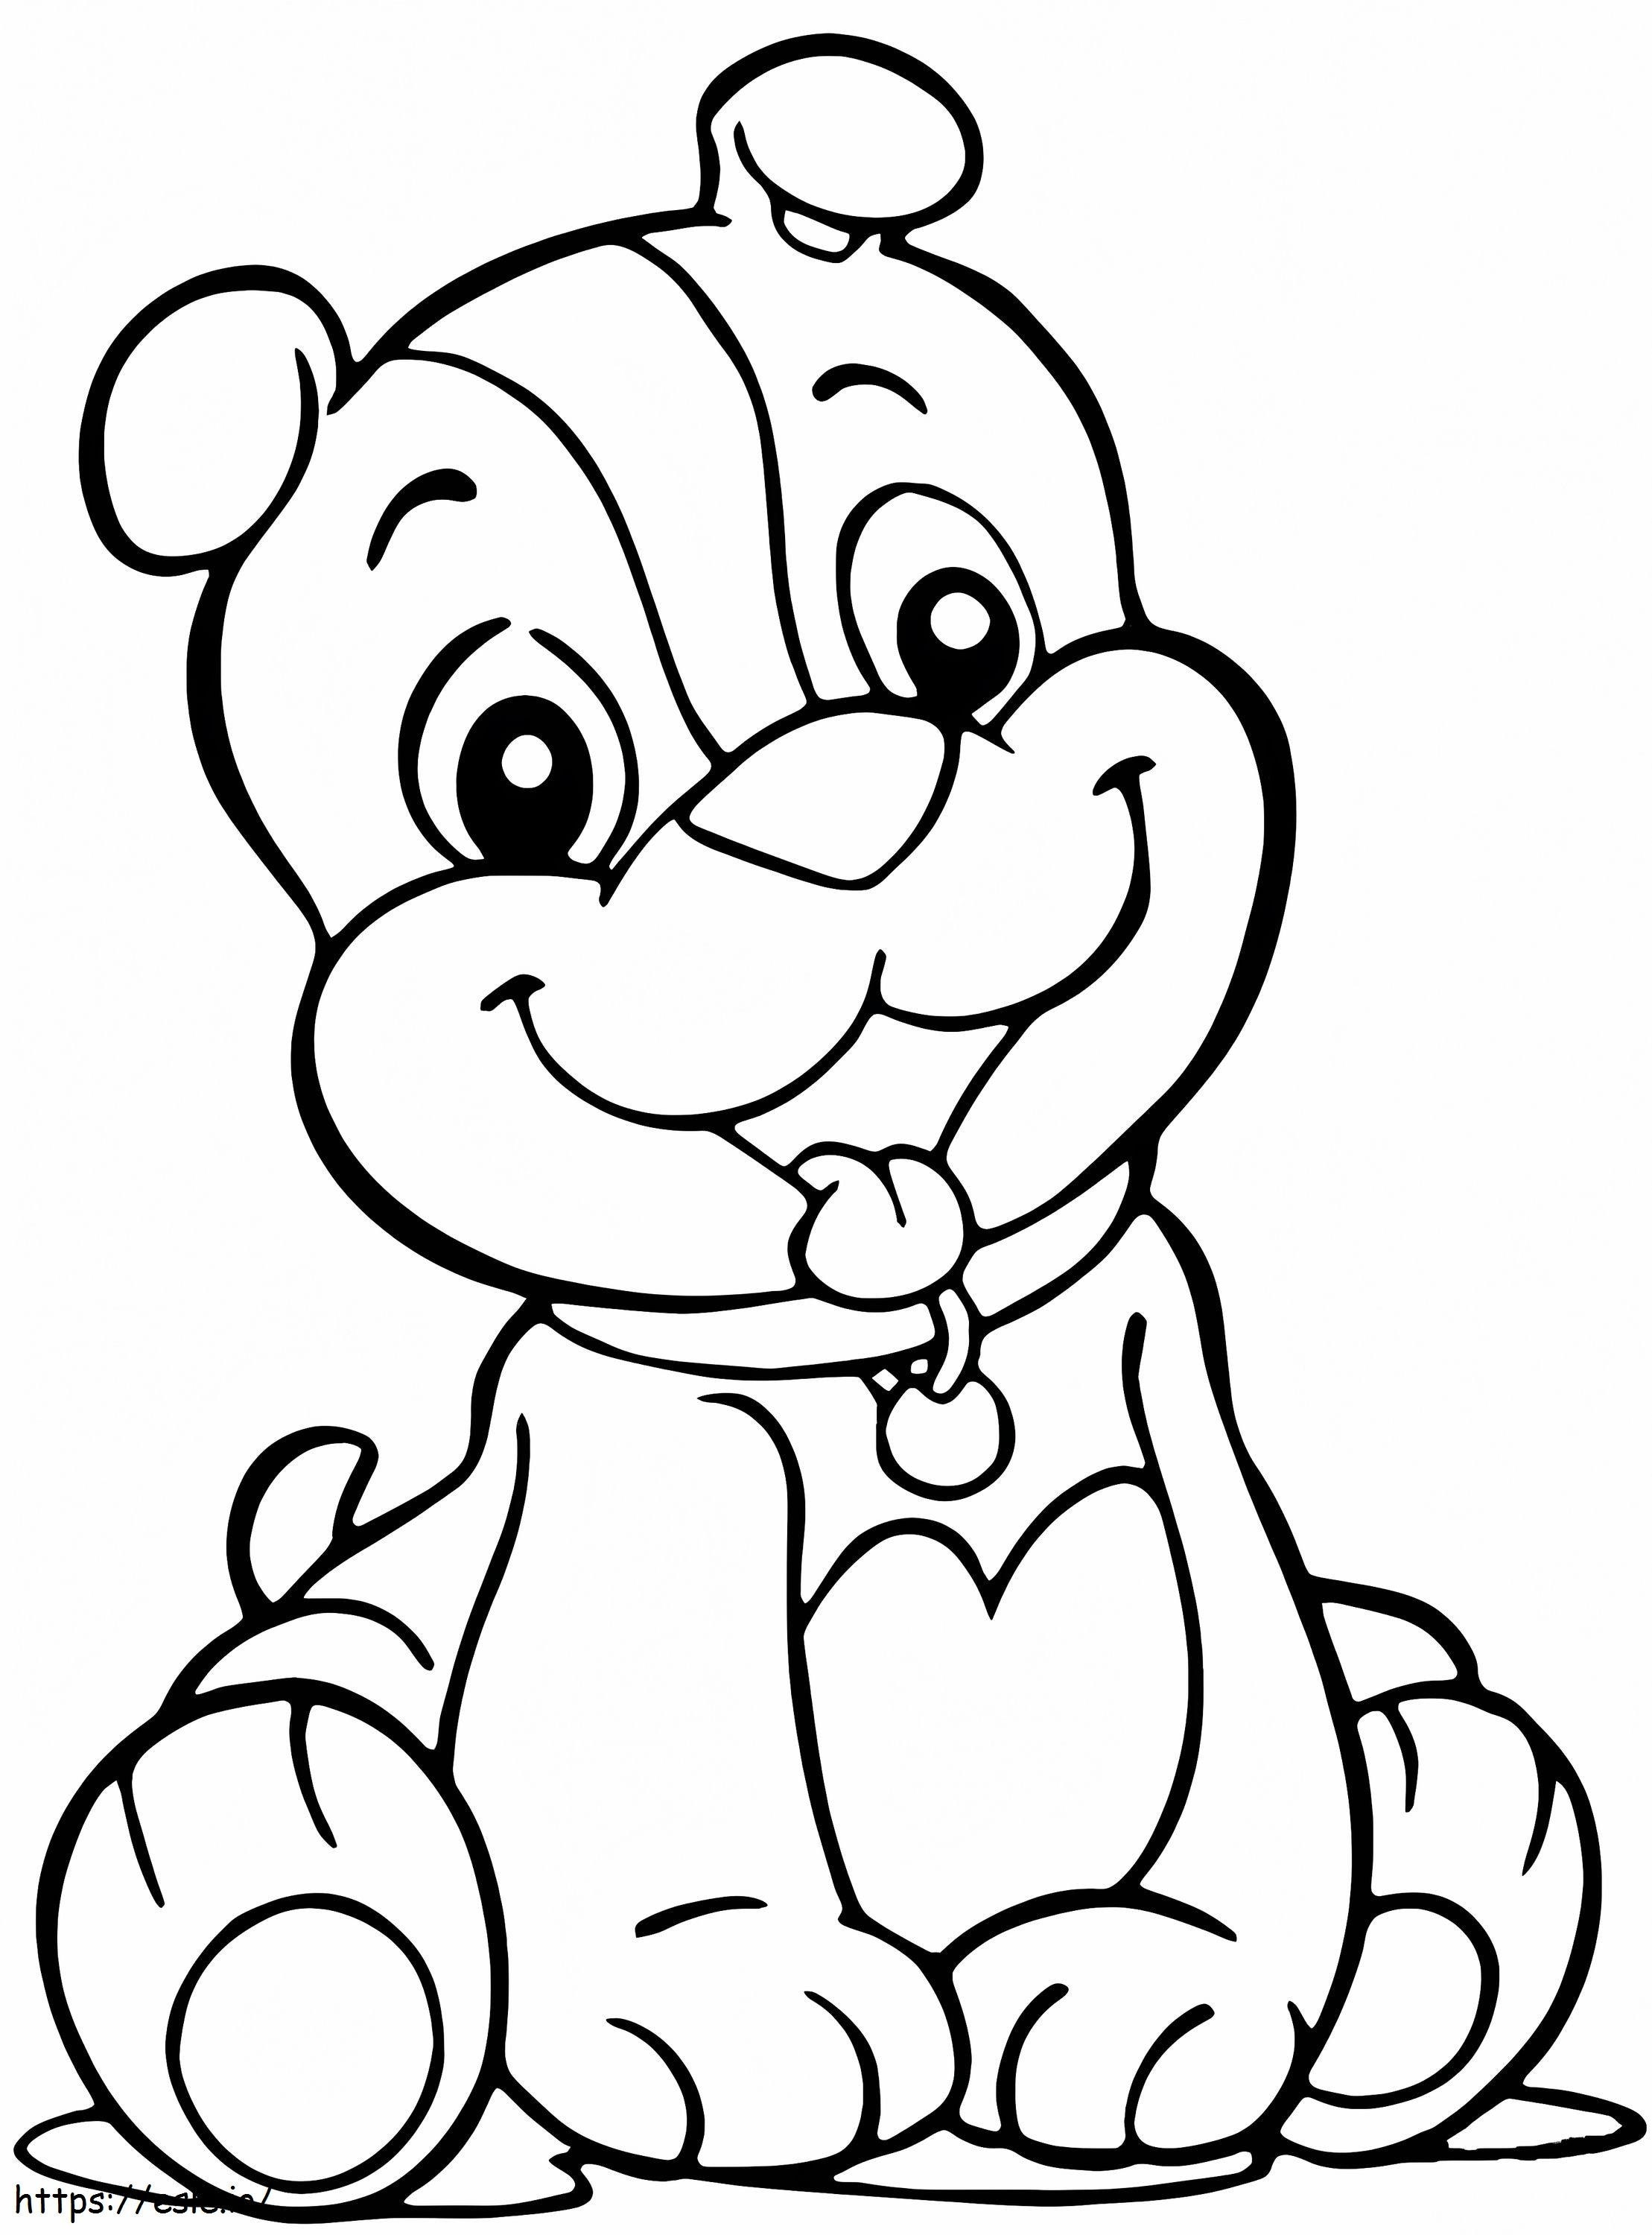 Rubble Paw Patrol 757X1024 coloring page